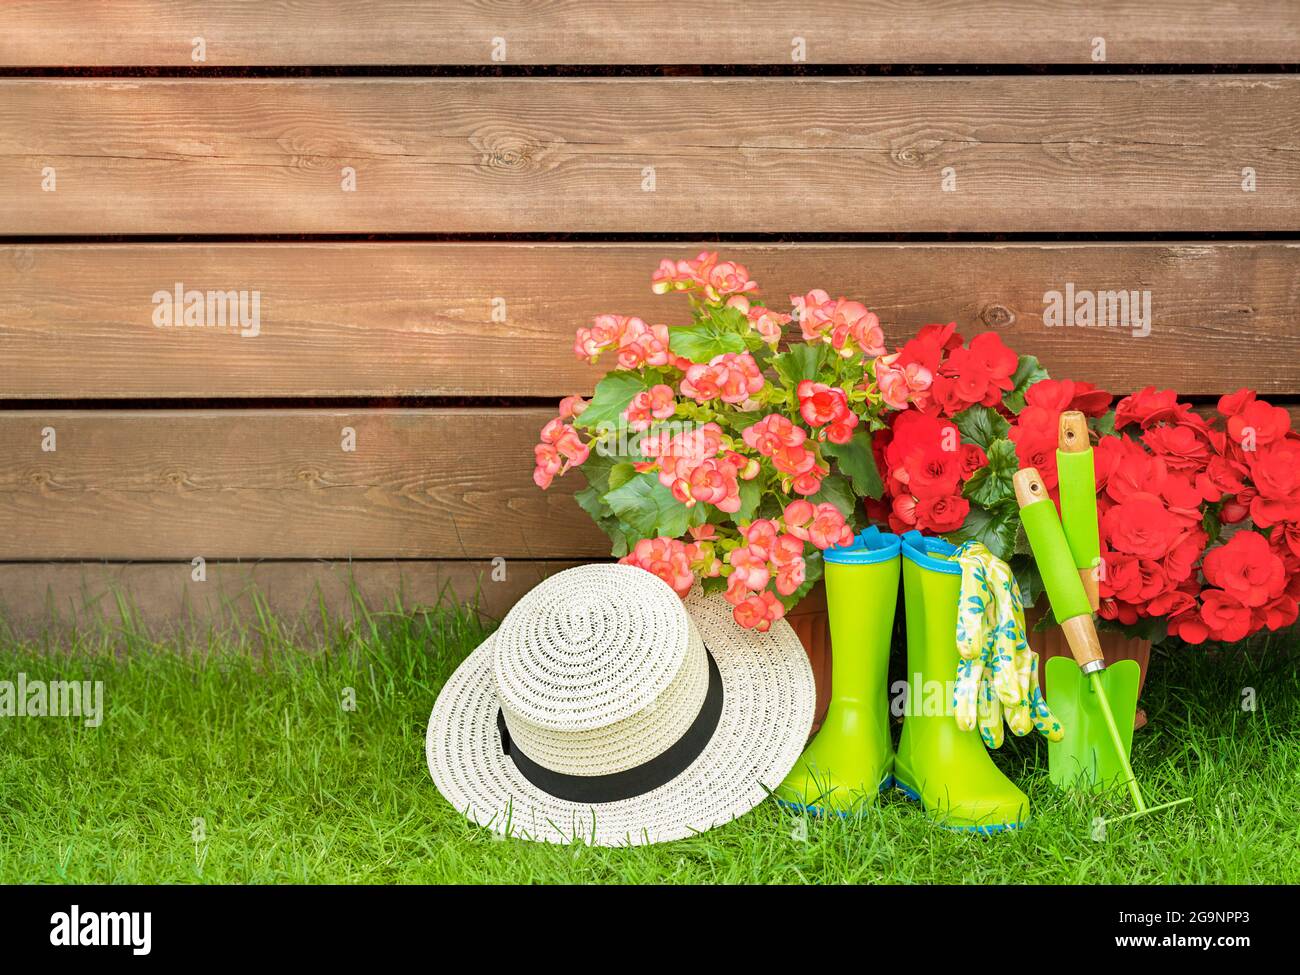 Wooden background with garden tools and a hat. Free space for your design Stock Photo